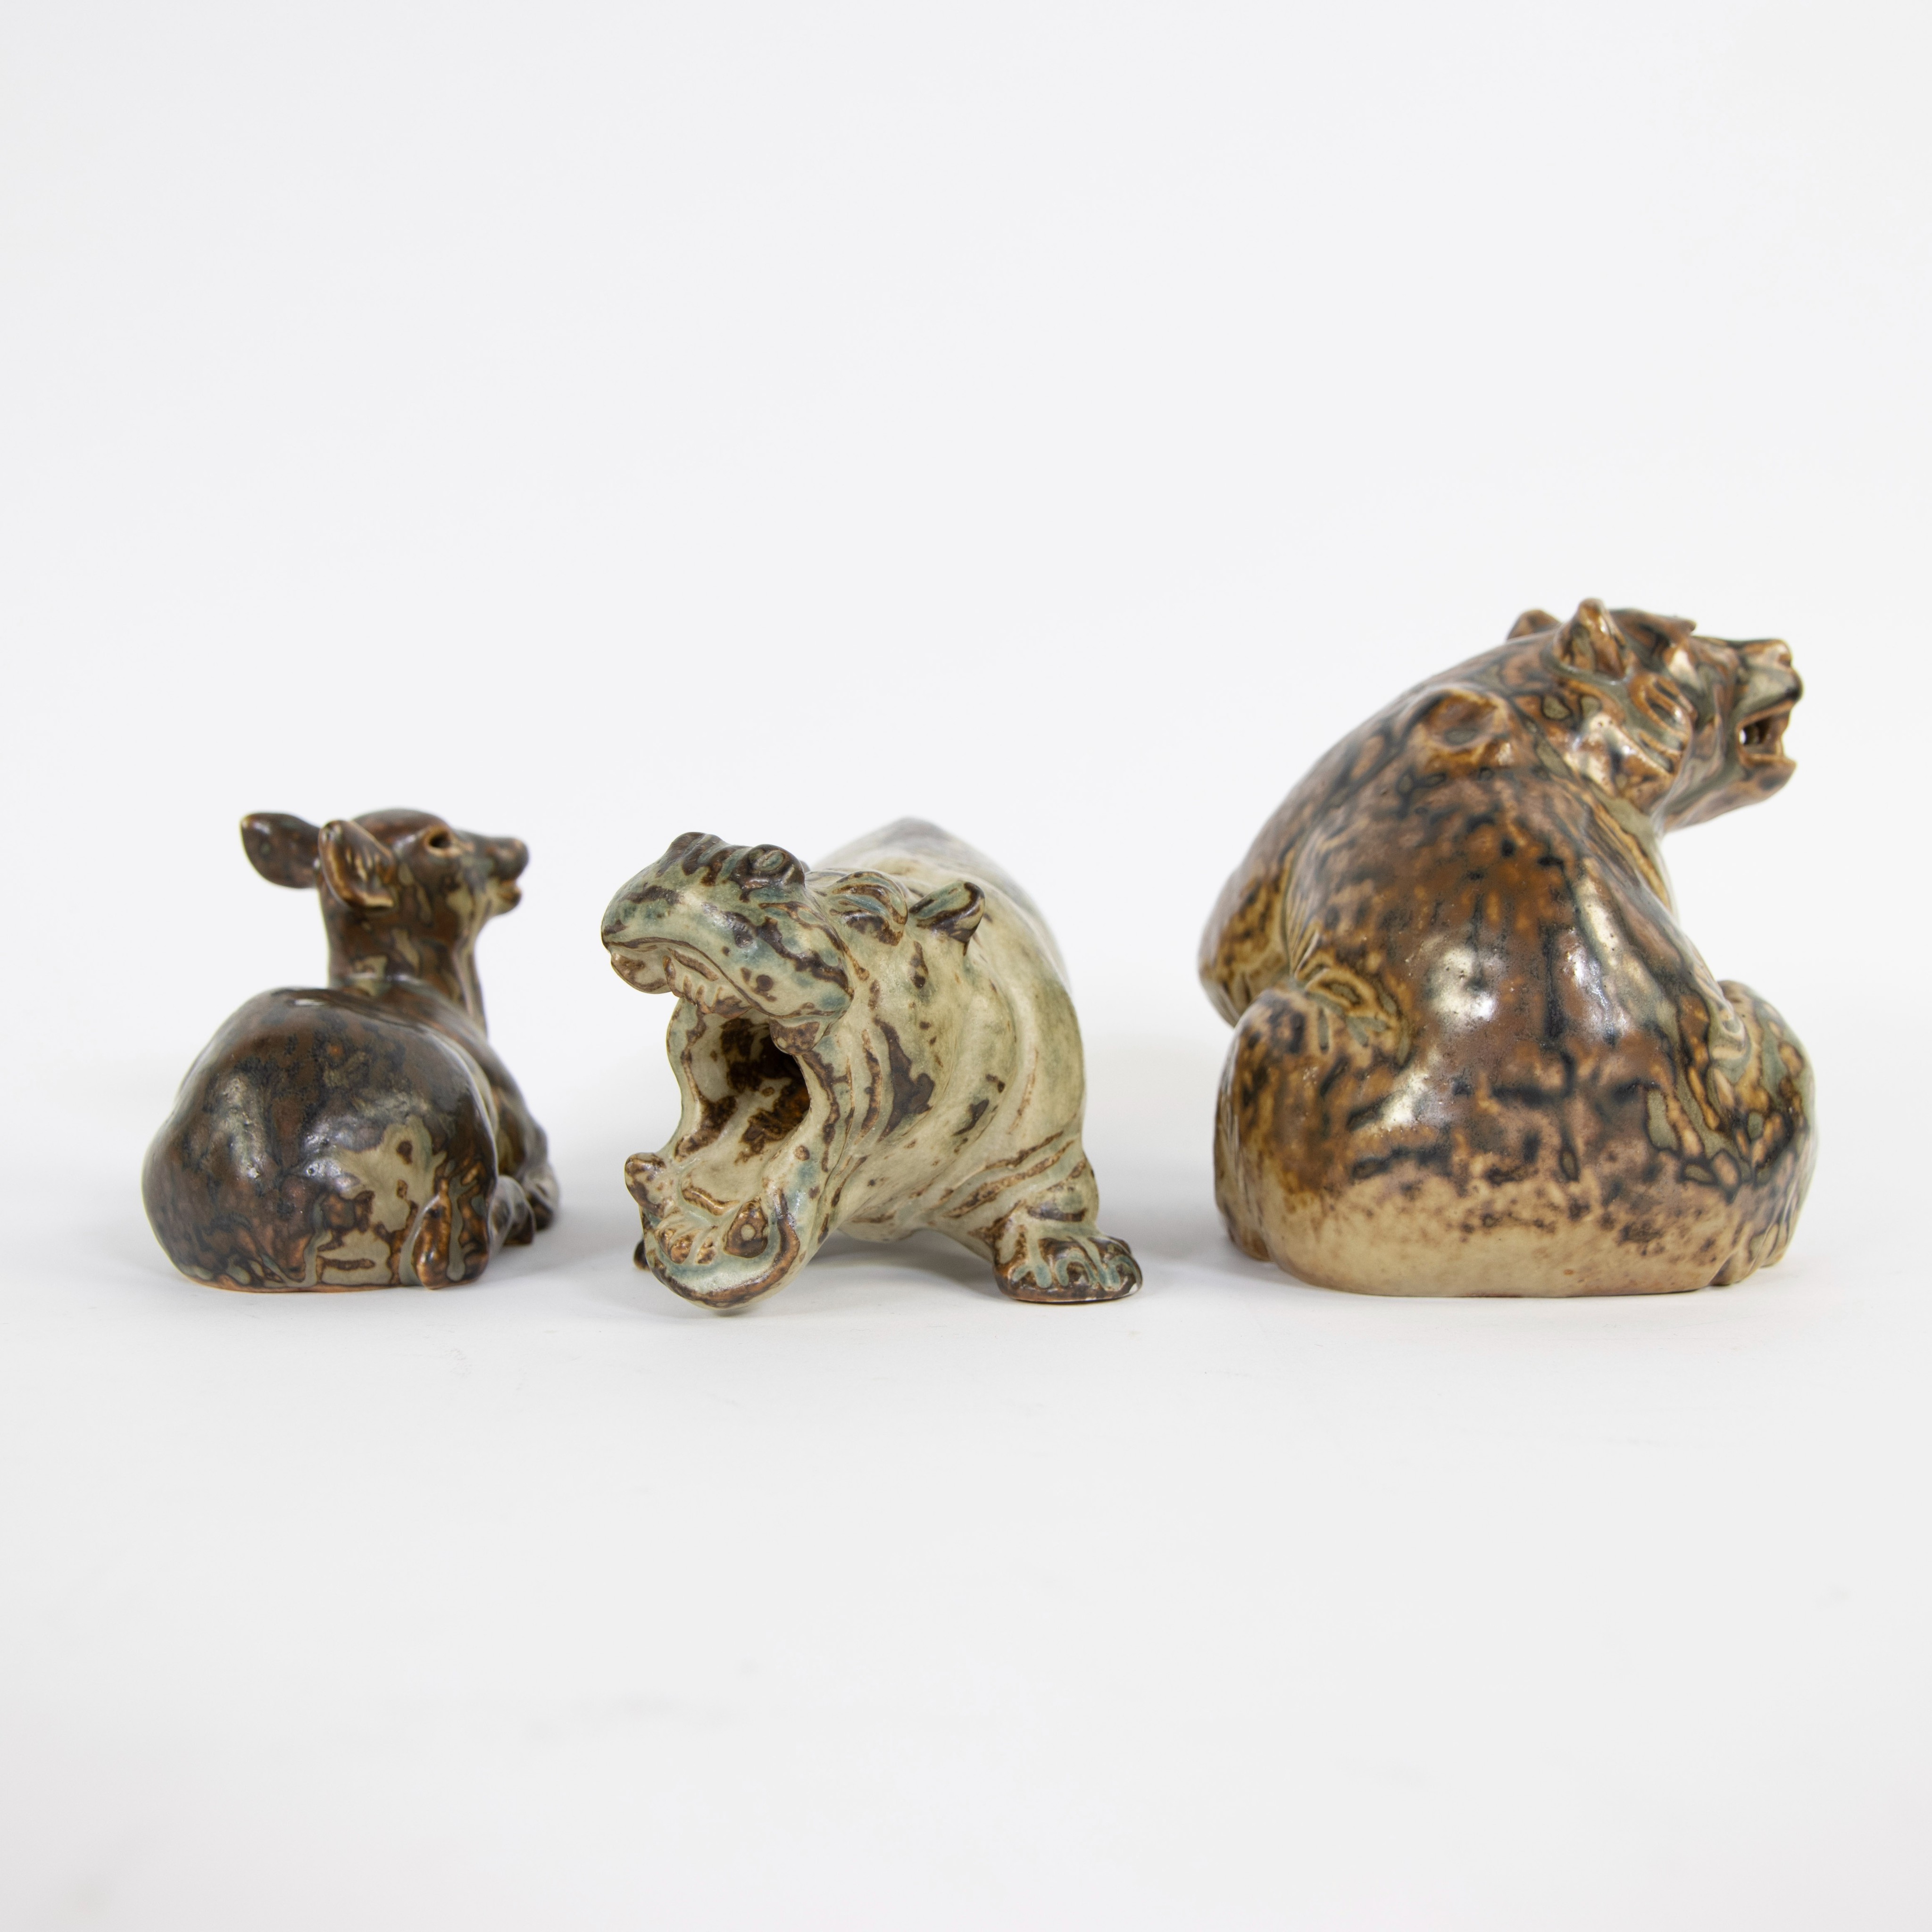 Lot Danish earthenware plate and 3 Royal Copenhagen figurines of animals, marked - Image 5 of 6